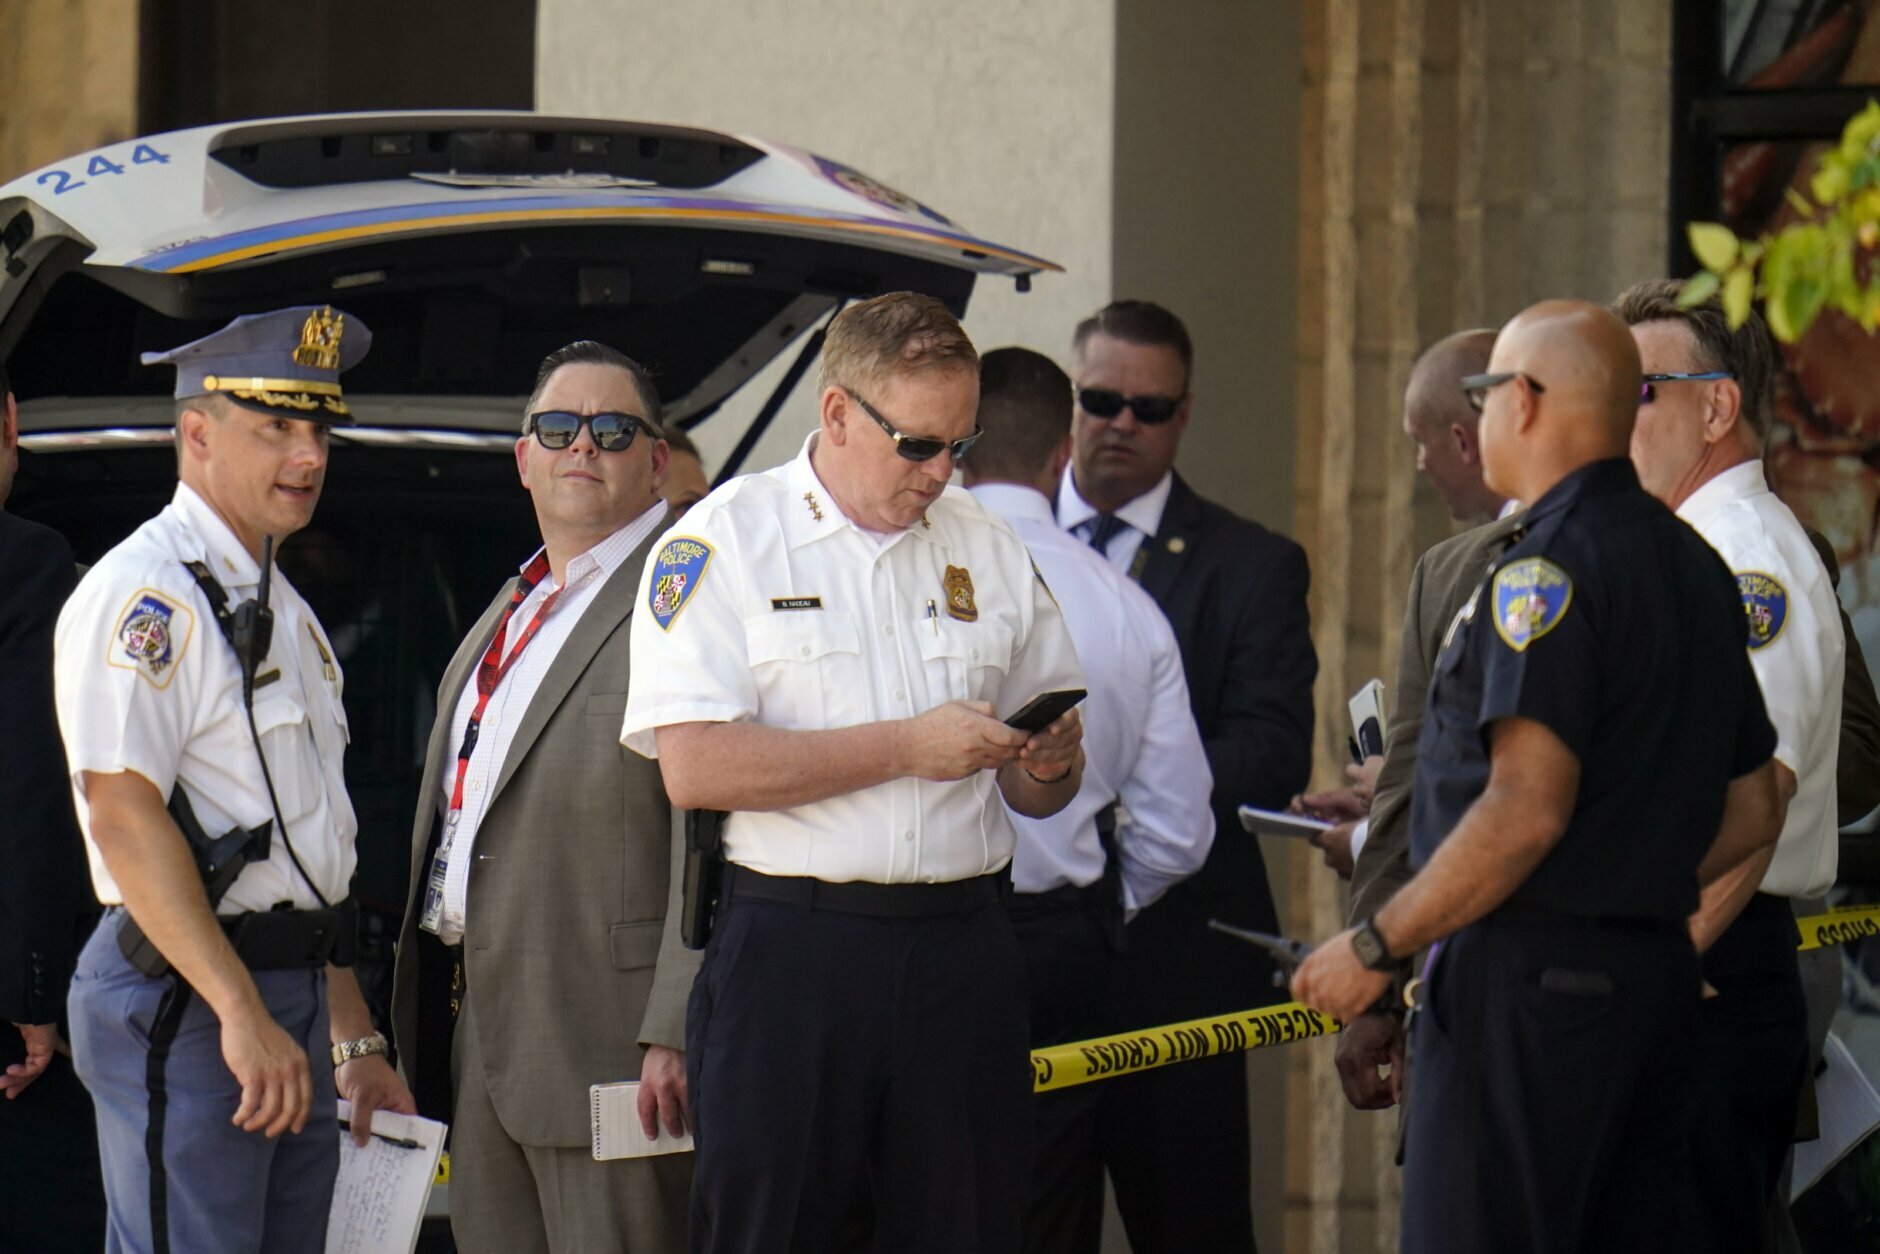 <p>Law enforcement officials gather near a mall parking area where two Baltimore city police officers were shot and a suspect was killed as a U.S. Marshals’ task force served a warrant, Tuesday, July 13, 2021, in Baltimore, Md. The police officers were taken to the University of Maryland Medical Center with injuries that aren’t thought to be life-threatening, county police spokeswoman Joy Stewart said.(AP Photo/Julio Cortez)</p>
